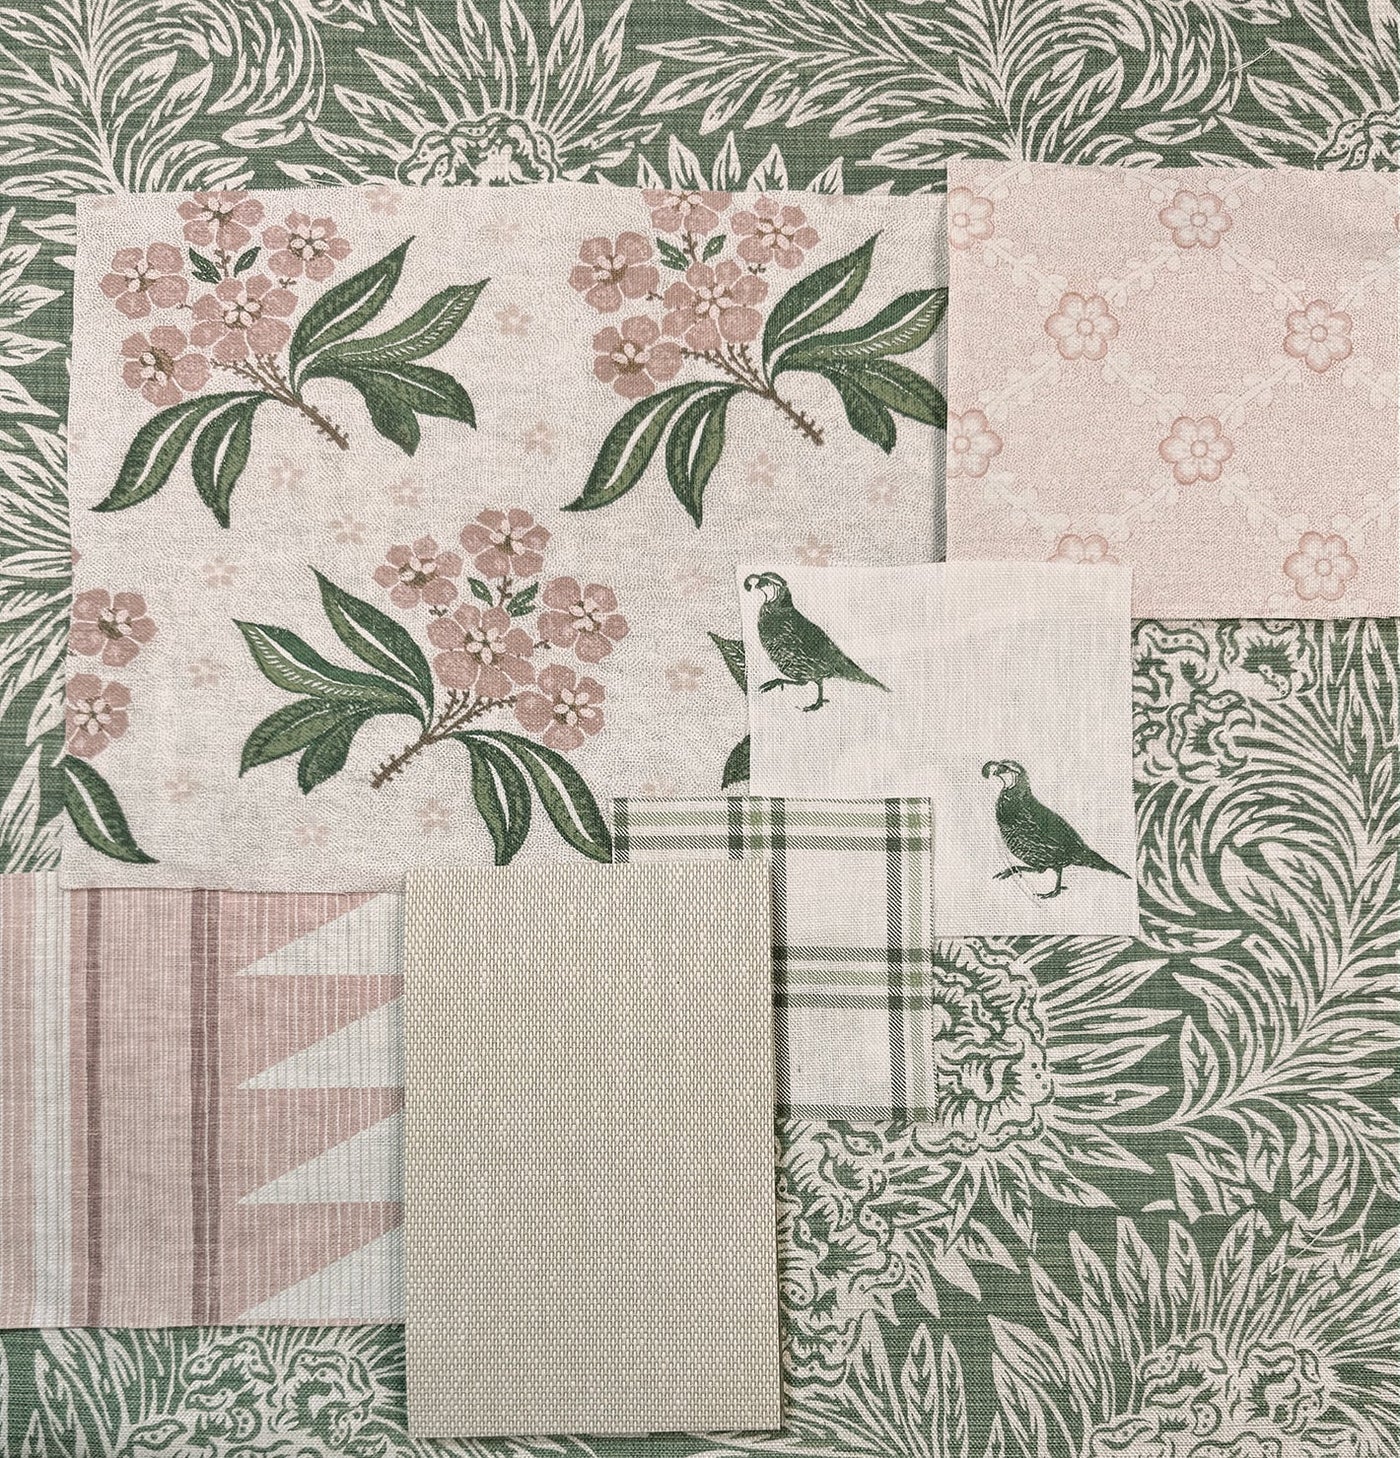 'Marian' Linen Fabric by Nathan Turner - Pink Green